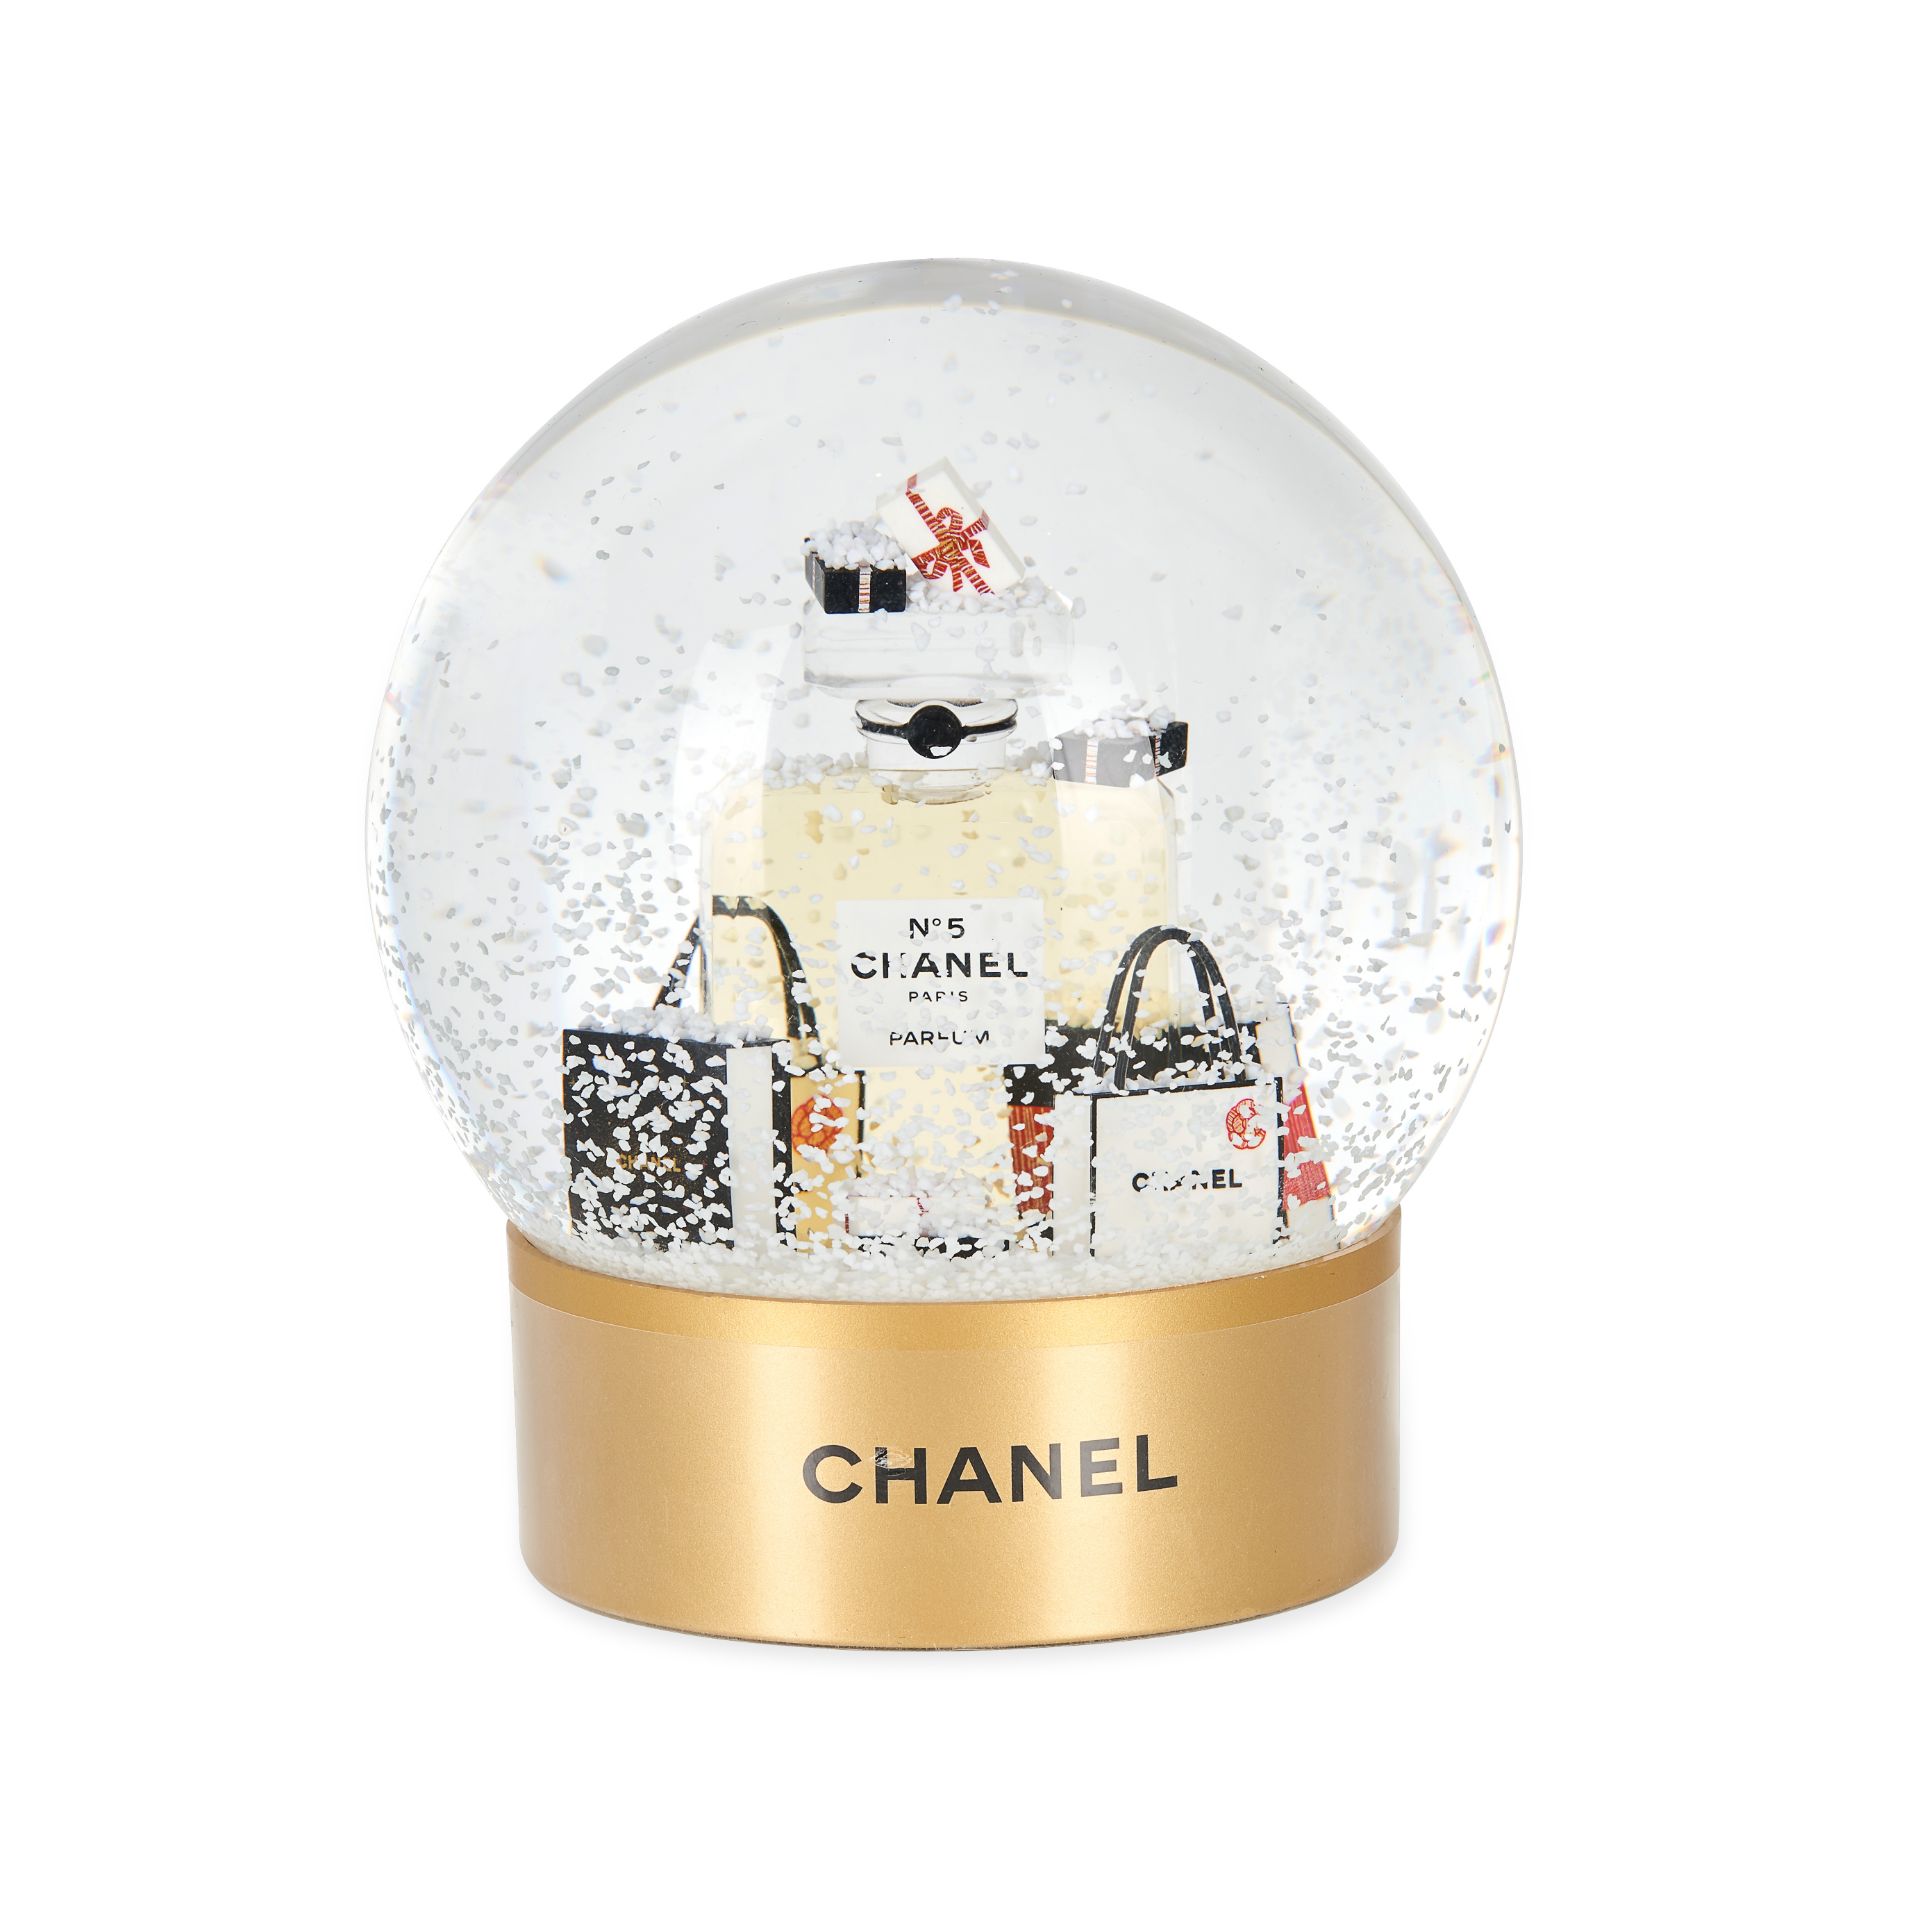 CHANEL NO 5 PERFUME SNOW GLOBE Condition grade A, as new. 13cm high. Chanel 'VIP' gift snow glo... - Image 2 of 3